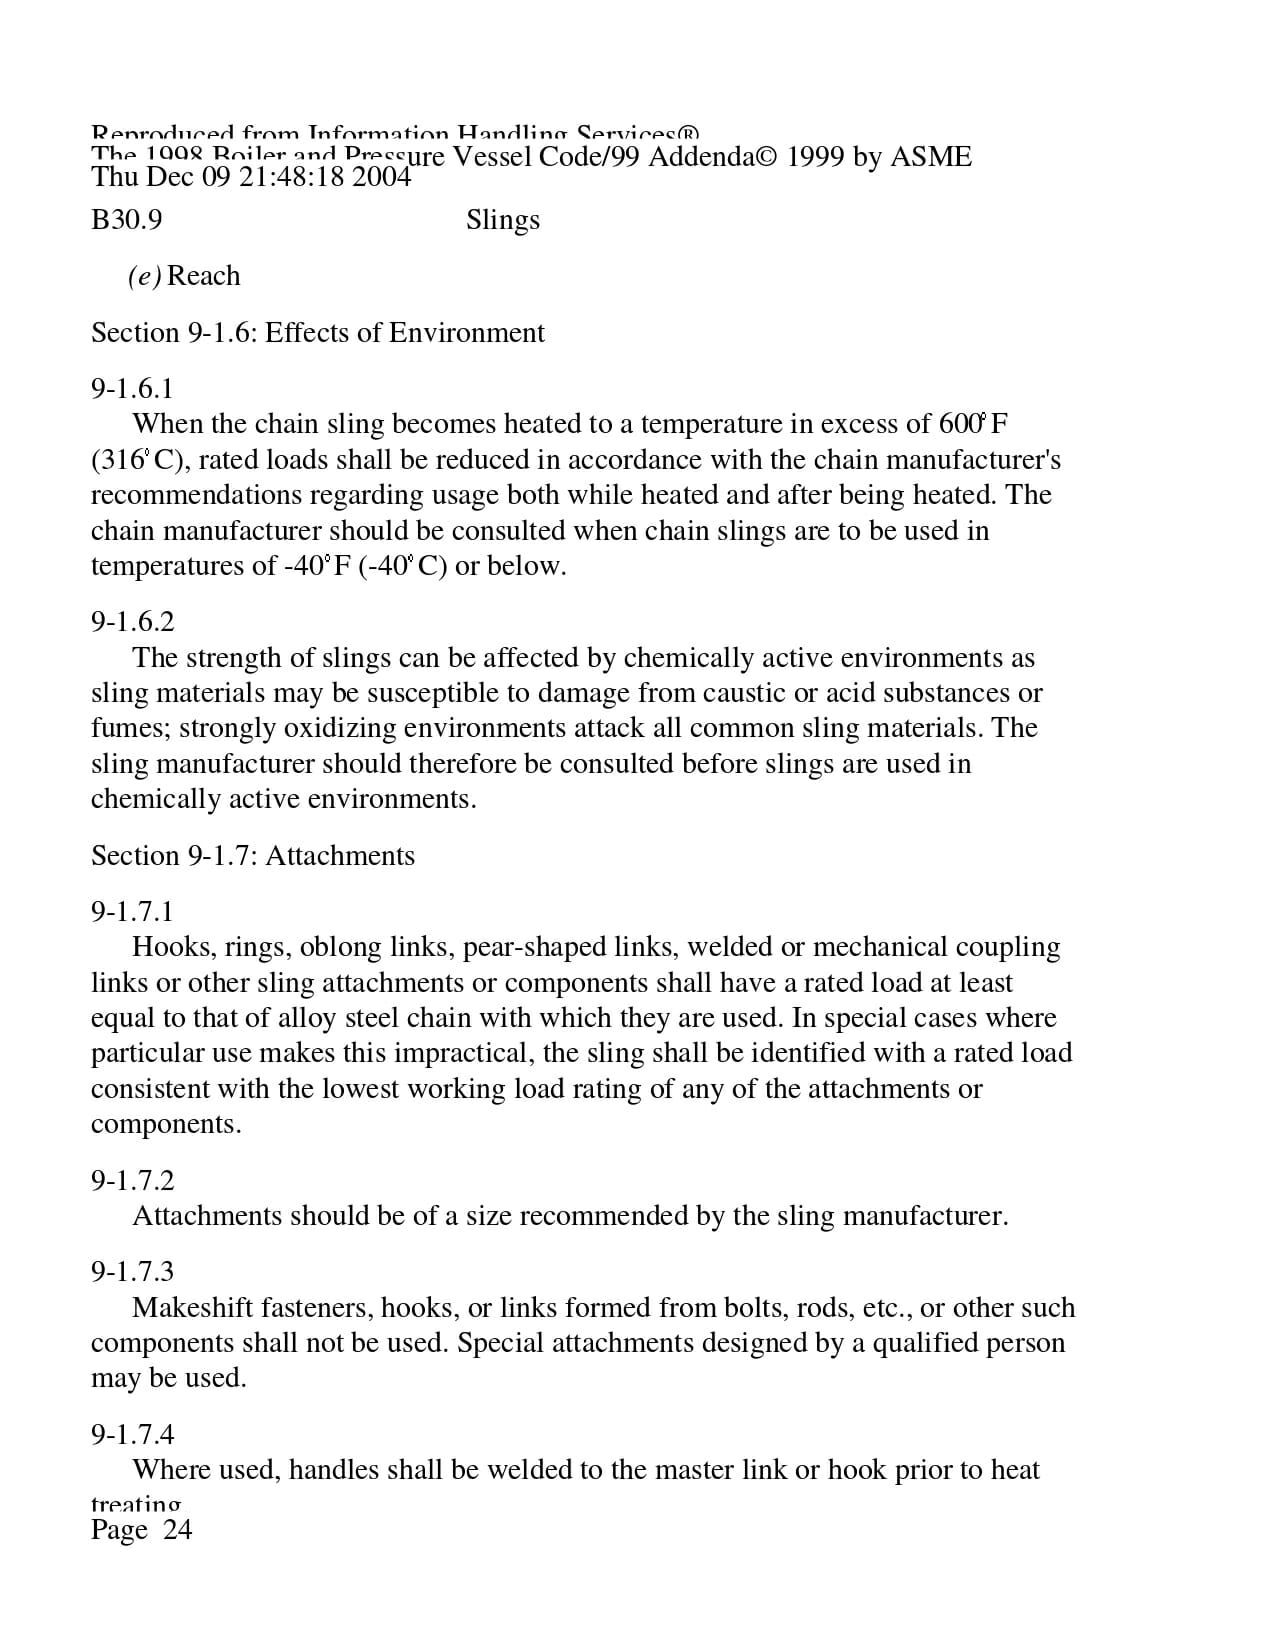 vdocument.in_asme-b309_page-0024